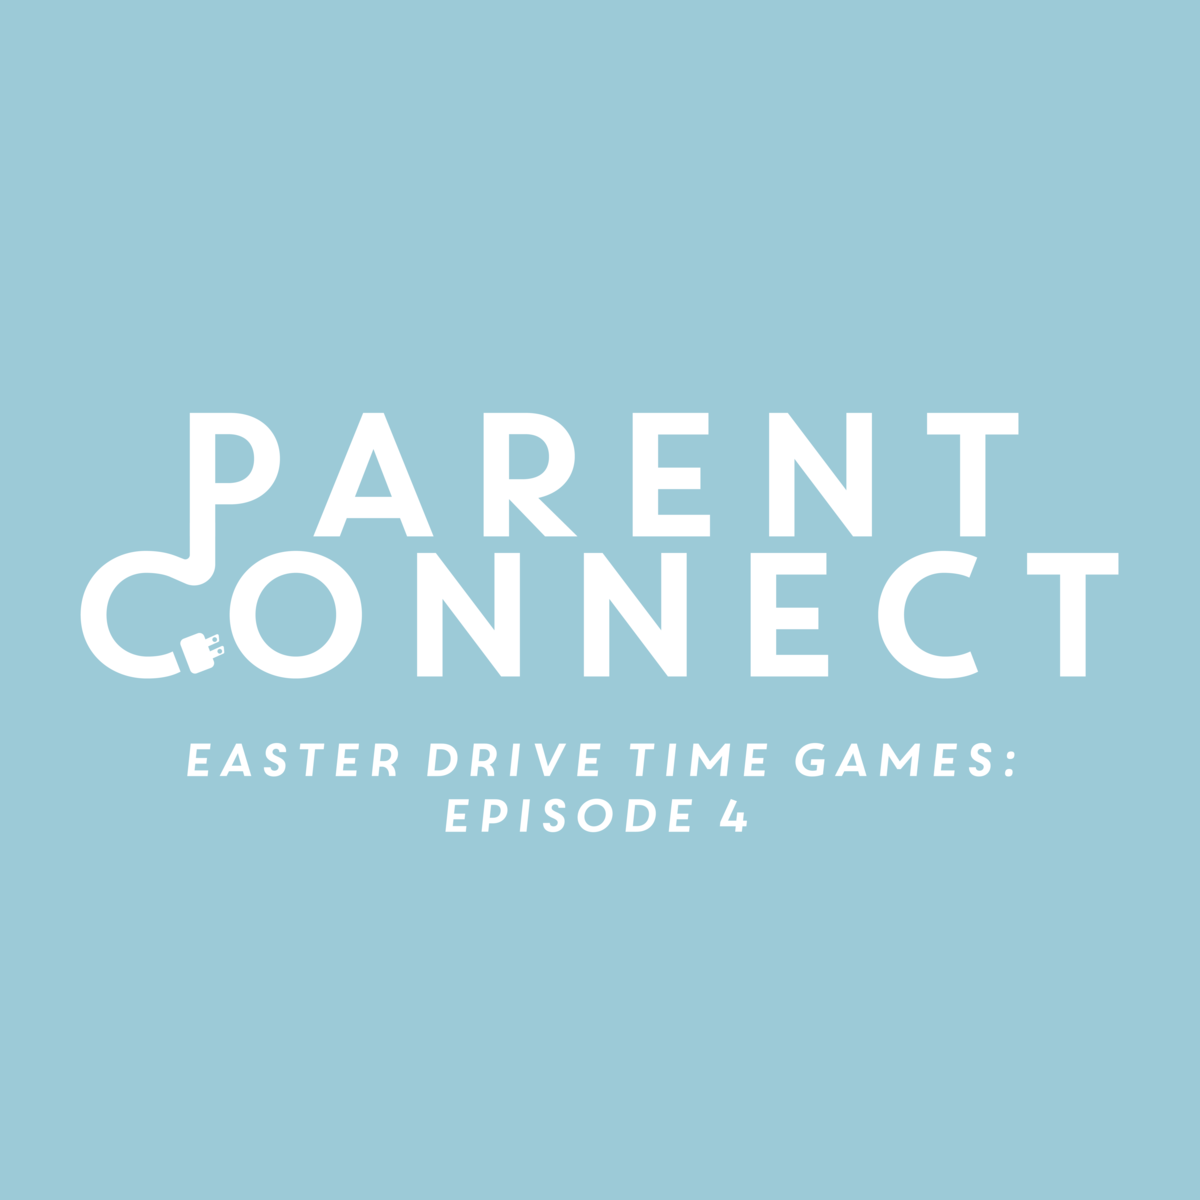 Easter Drive Time Games: Episode 4